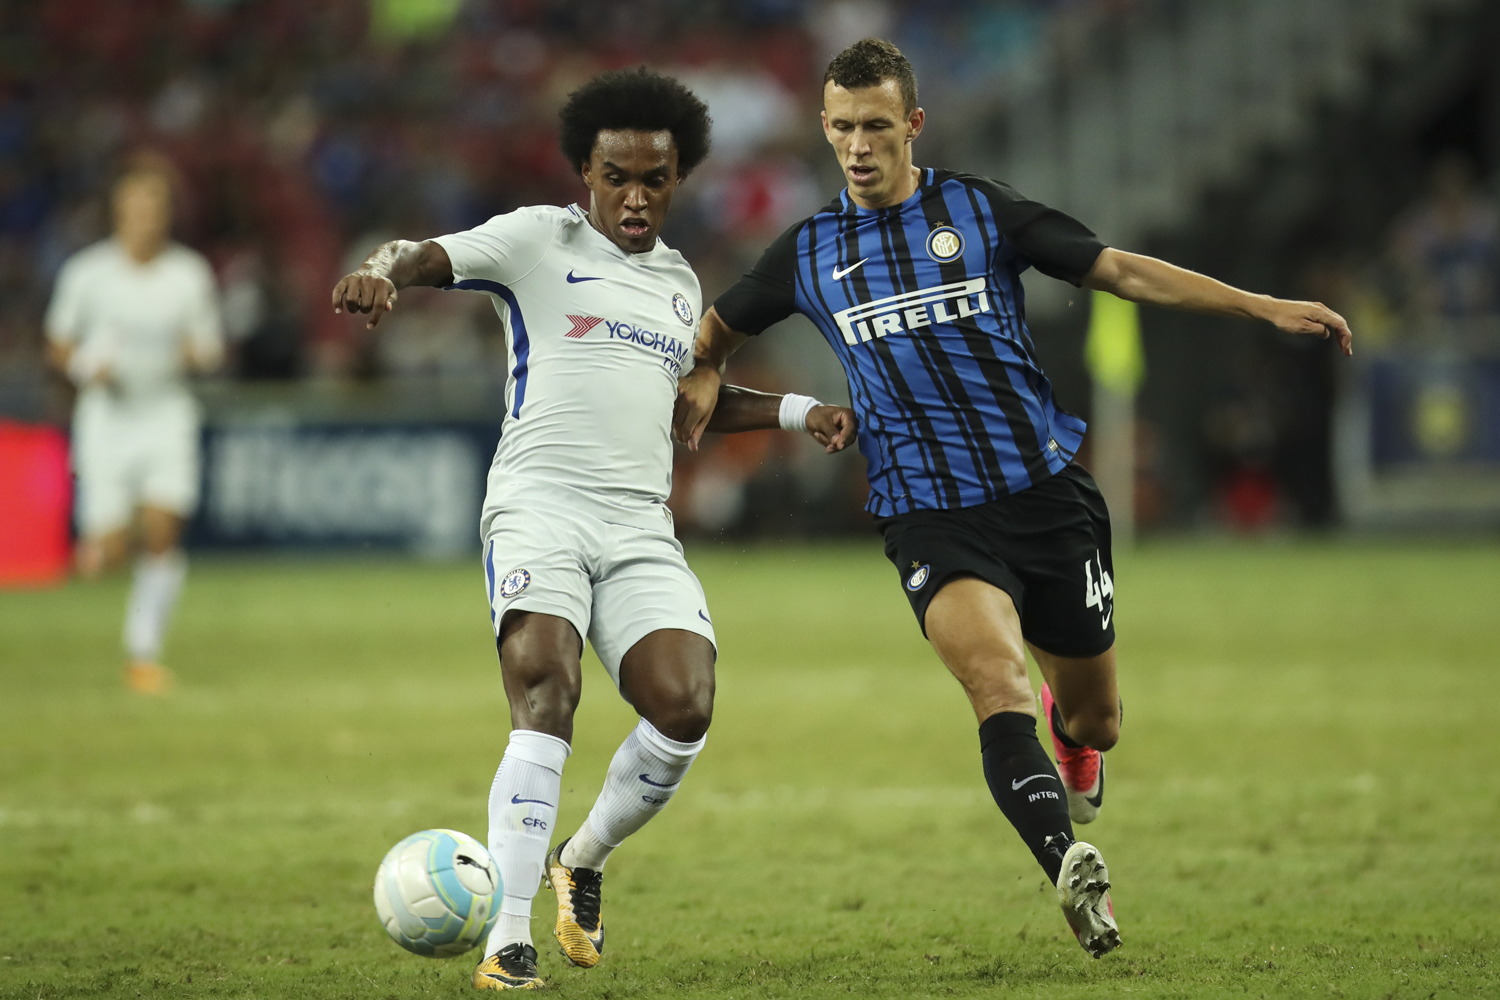  Soccer Football - Chelsea v Inter Milan - International Champions Cup Singapore - Singapore - July 29, 2017 Chelsea's Willian in action with Inter Milan's Ivan Perisic REUTERS/Yong Teck Lim 